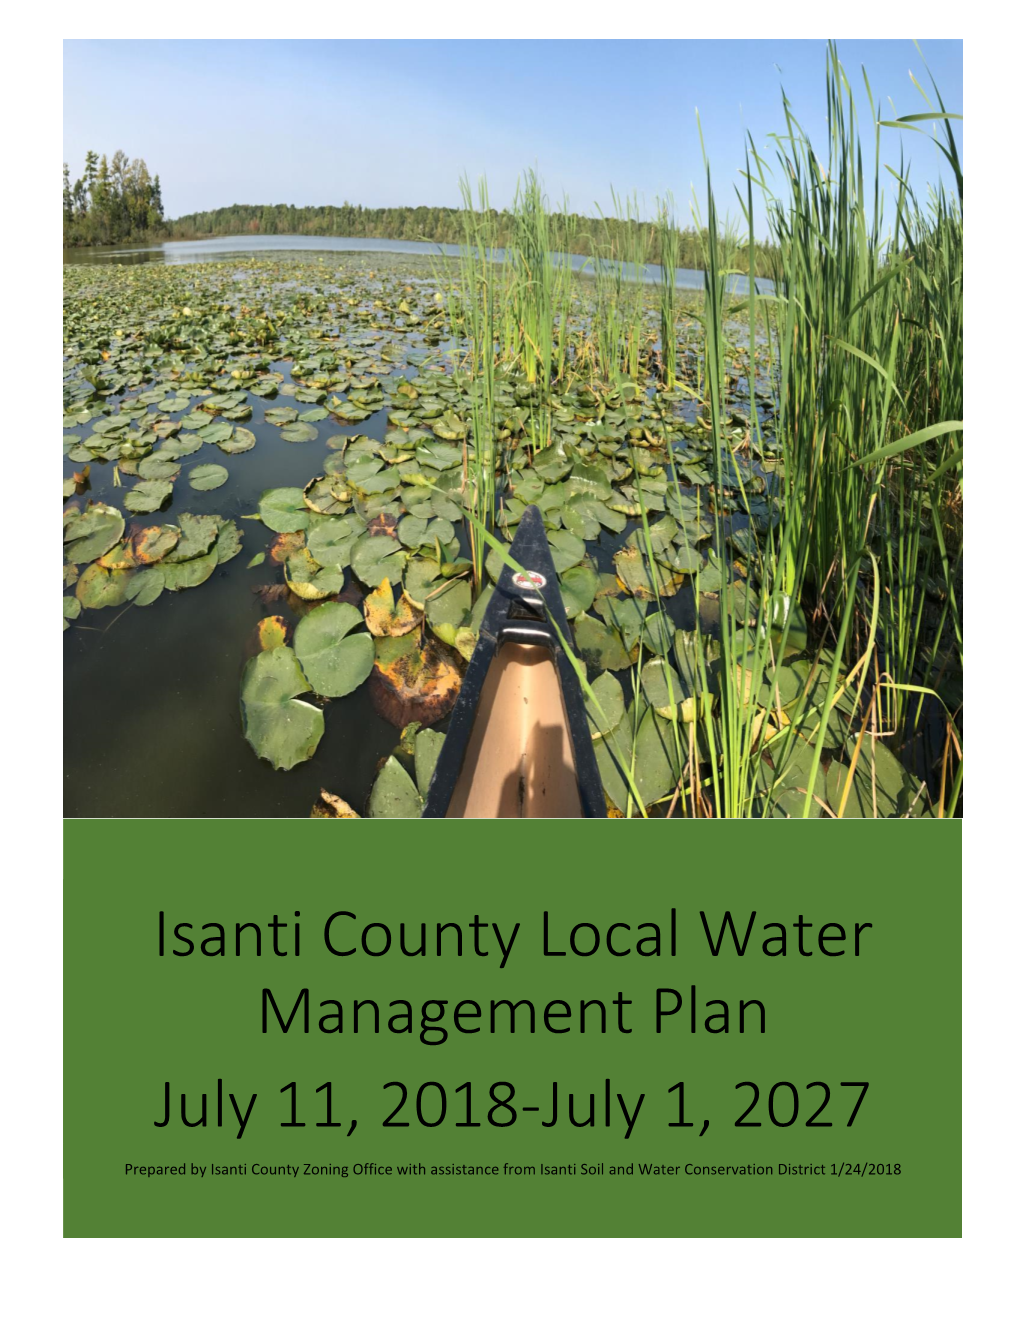 Isanti County Local Water Management Plan 2018-2028